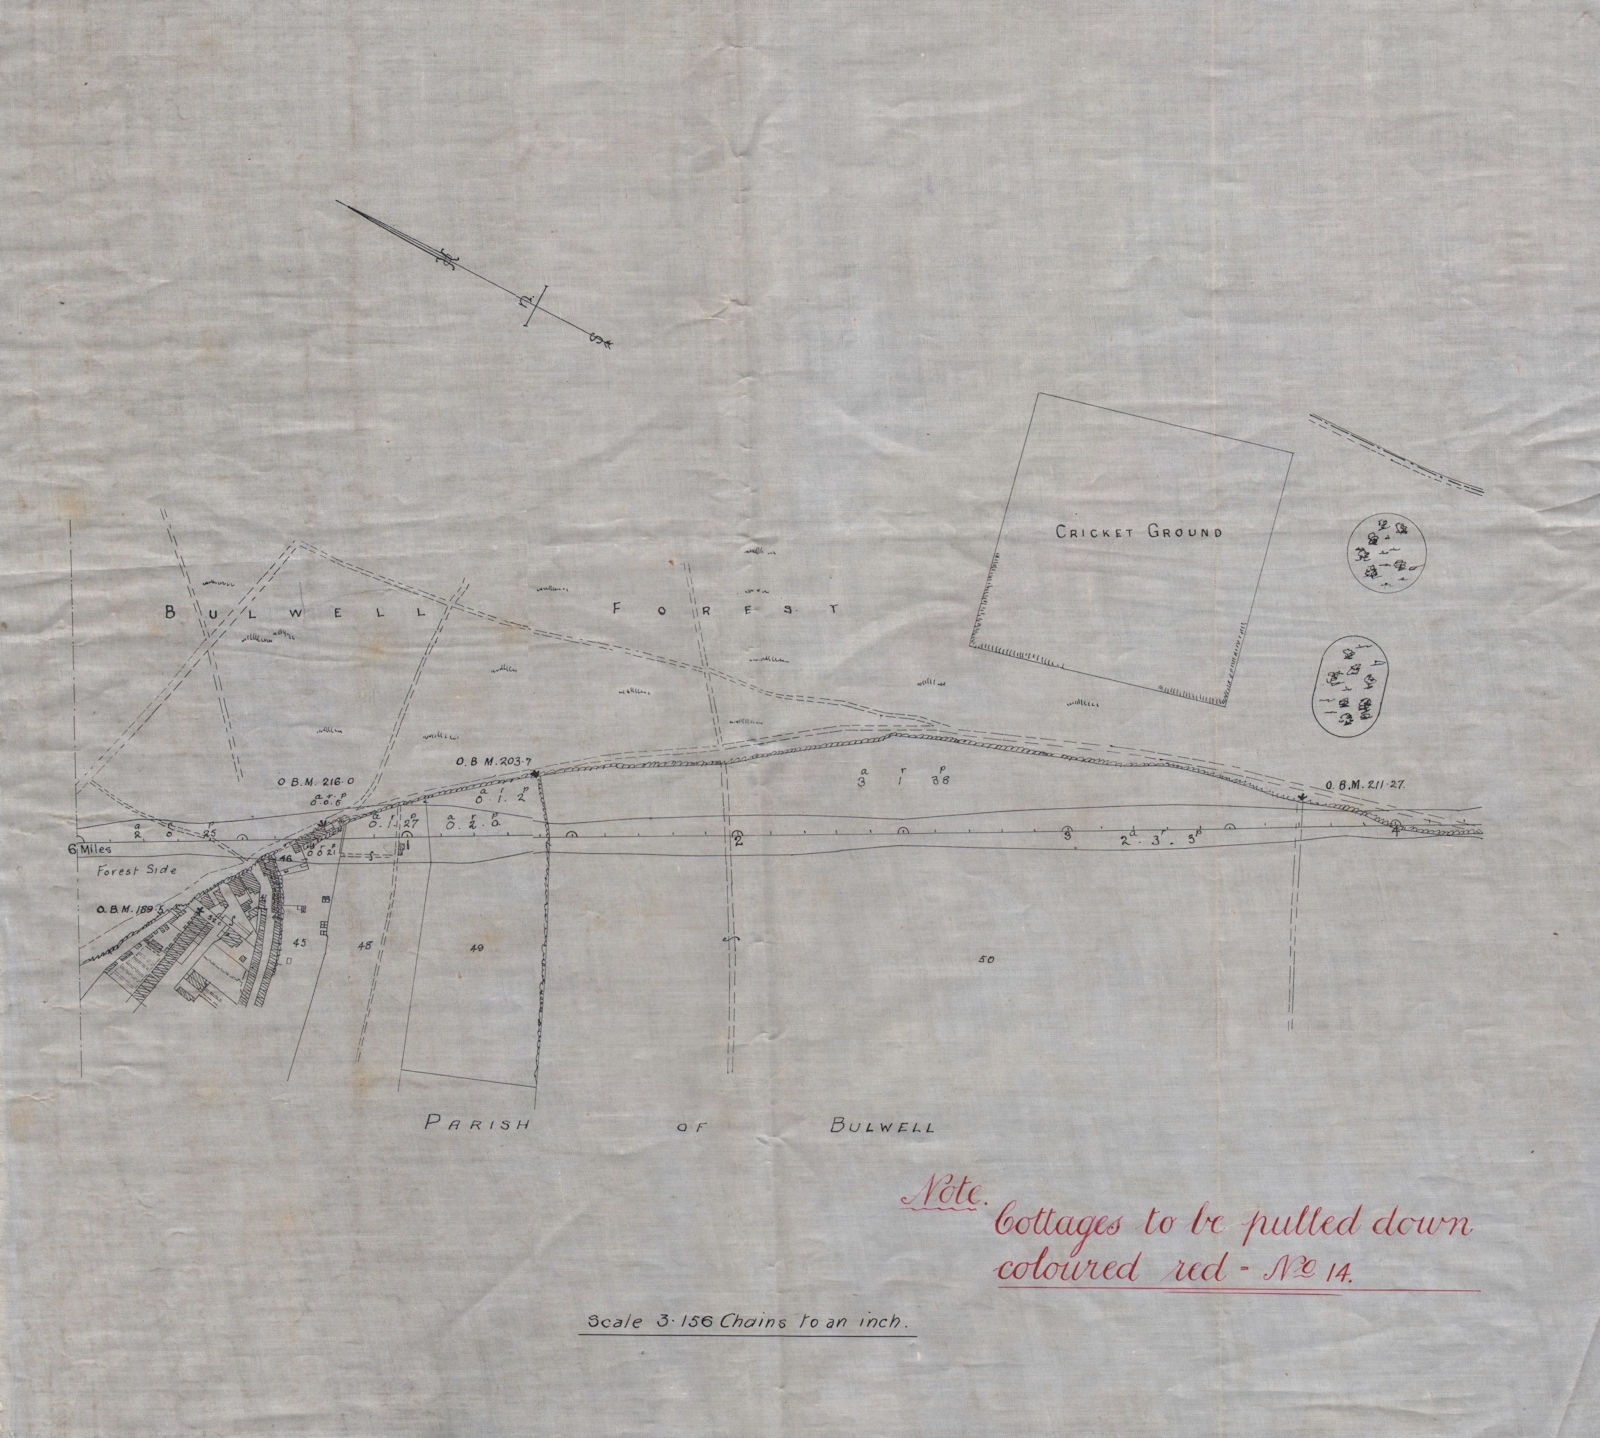 Associate Product BULWELL, Notts. Manuscript map. Proposed Midland Rail line. Cricket ground c1845